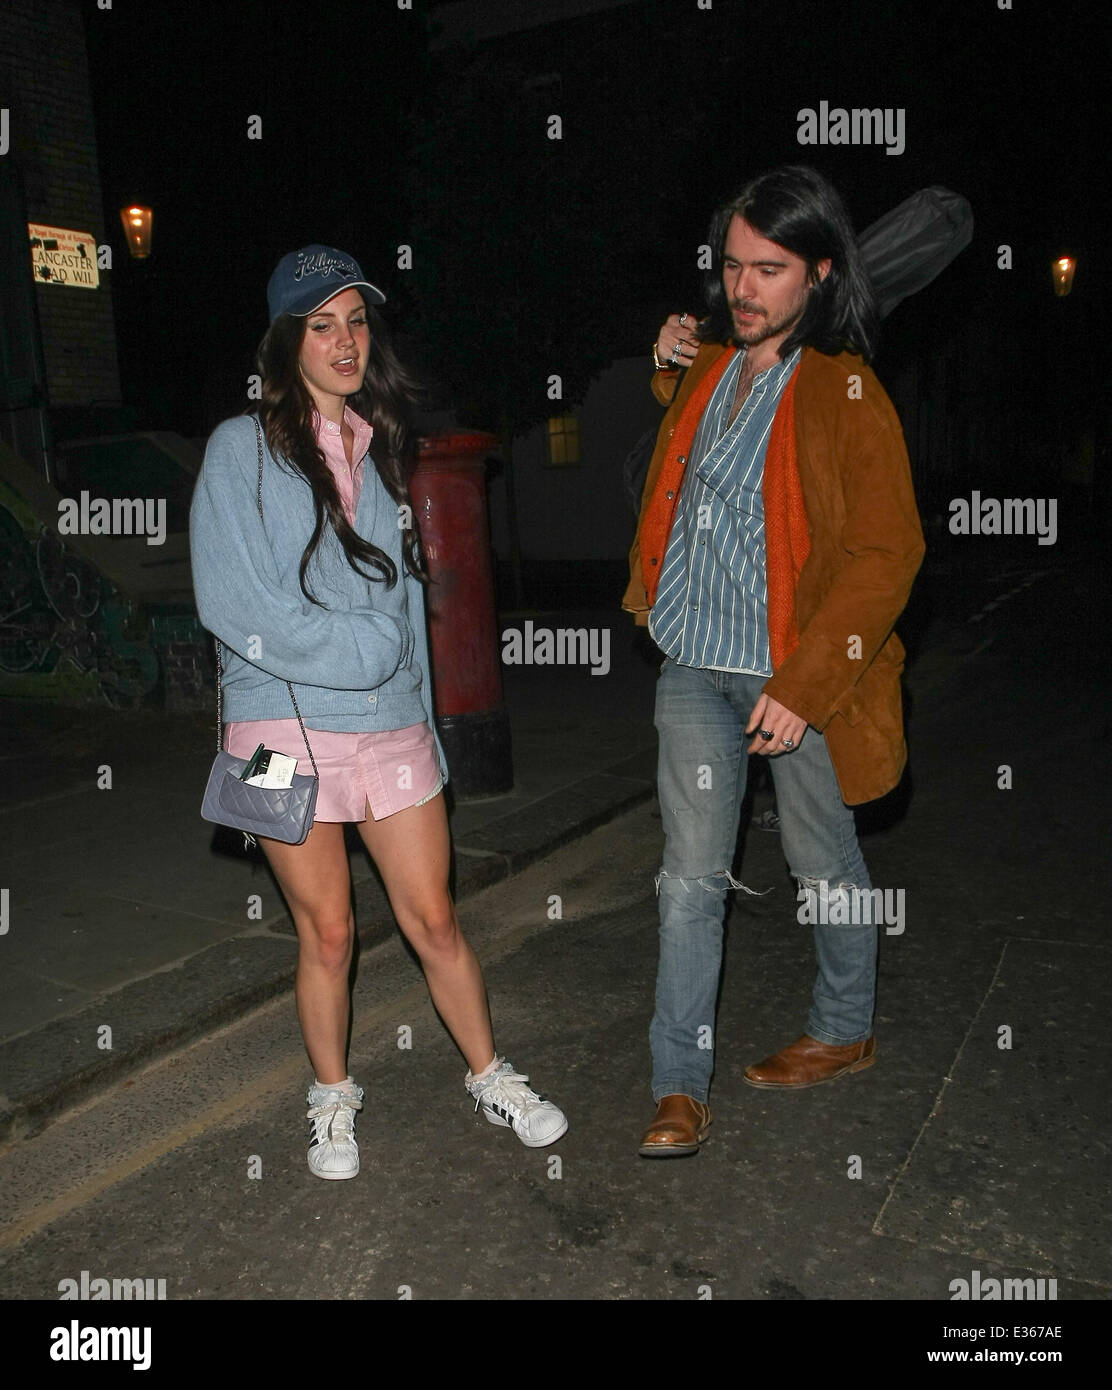 Lana Del Rey and her boyfriend Barrie-James O'Neill leaving a recording studio  Featuring: Lana Del Rey,Barrie-James O’Neill Whe Stock Photo